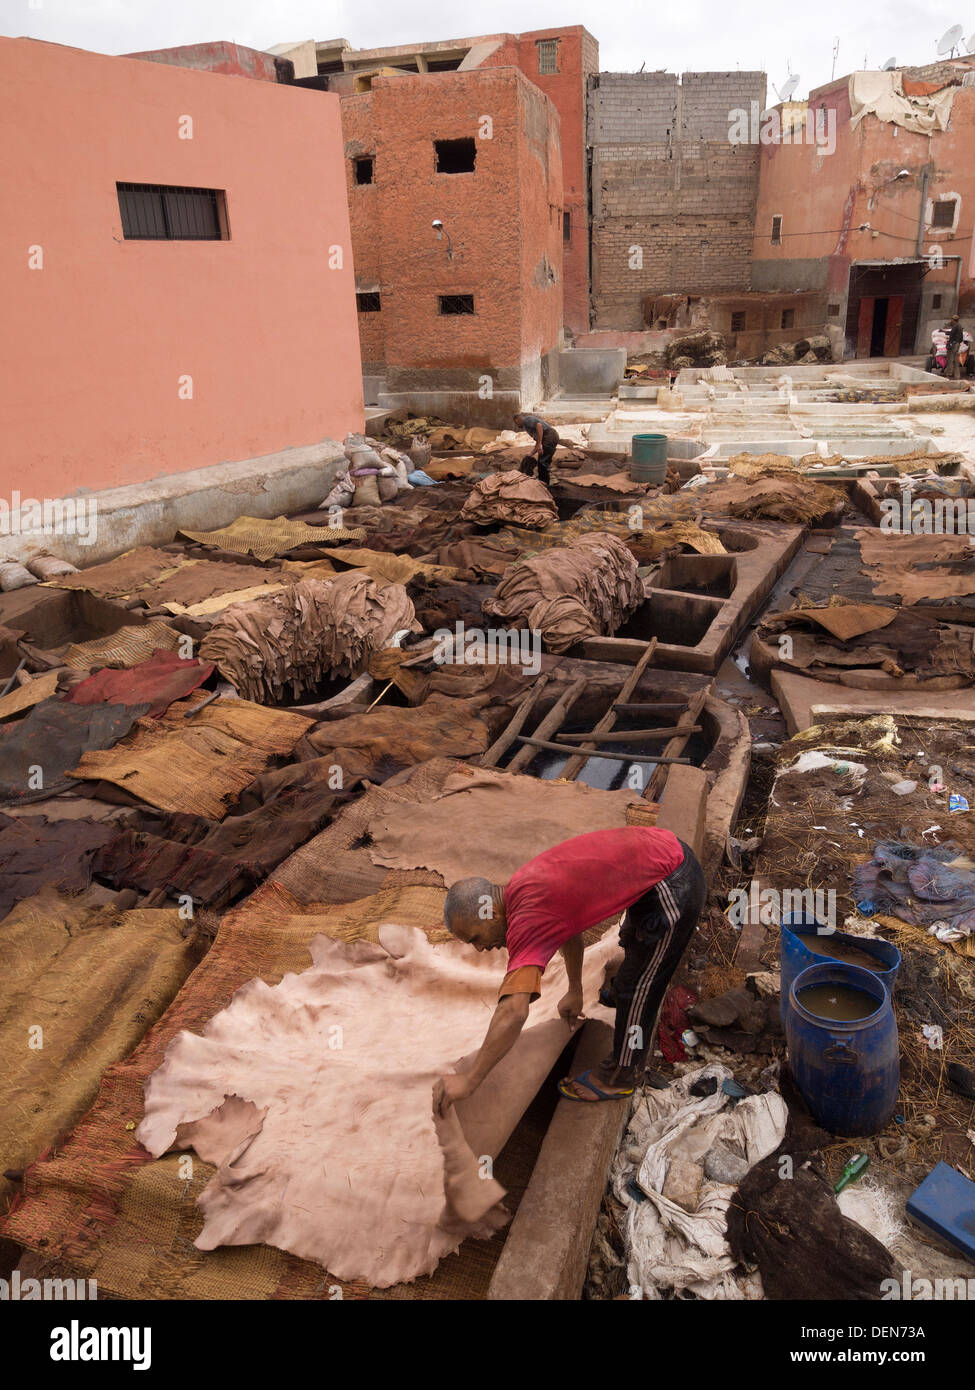 Man working in leather tannery in Marrakech, Morocco Stock Photo